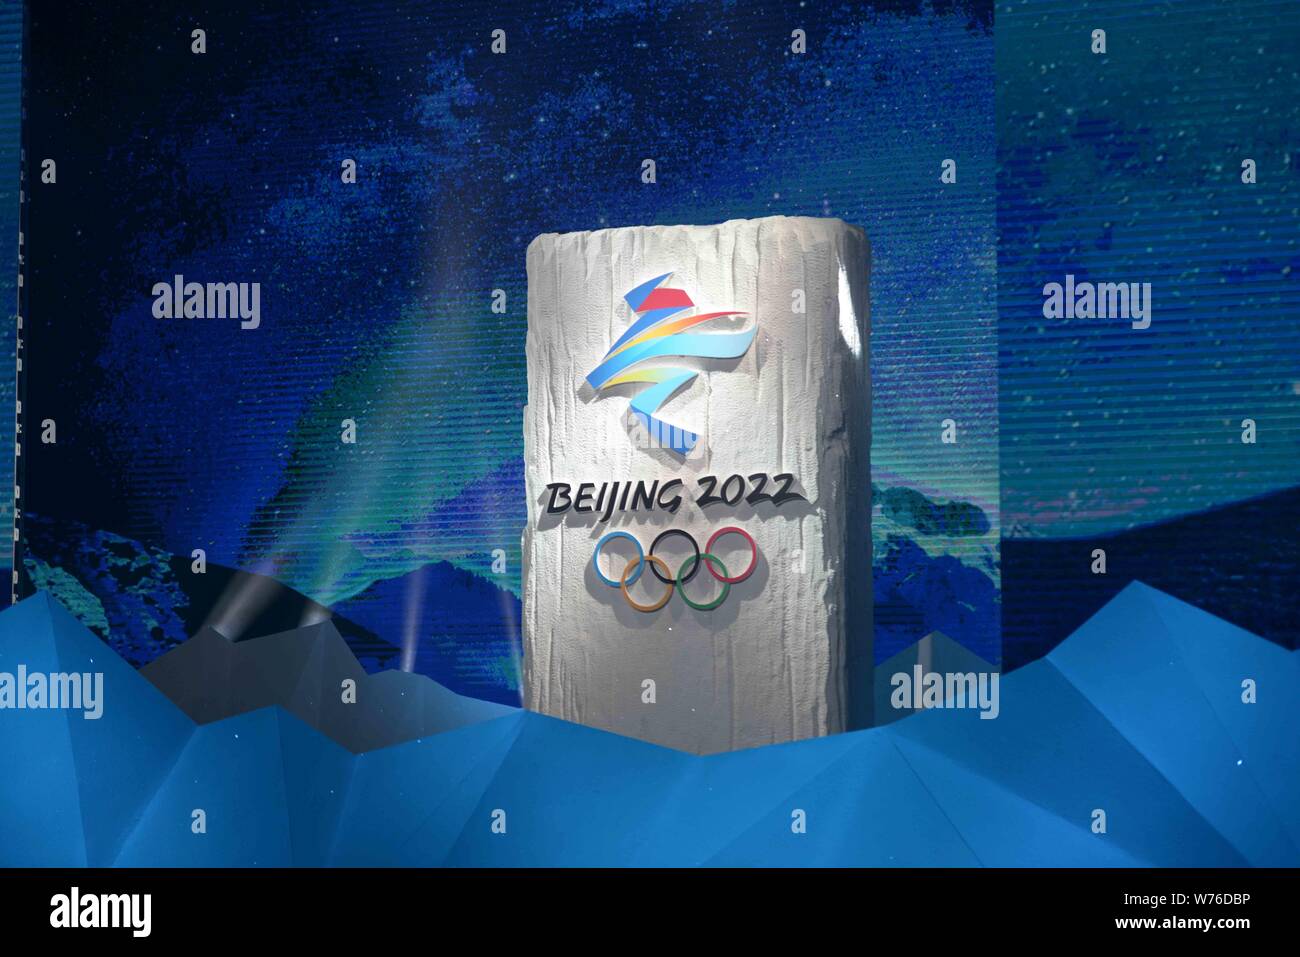 The emblem of Beijing 2022 Olympic Winter Games is unveiled during the emblem launch ceremony for the Beijing 2022 Olympic and Paralympic Winter Games Stock Photo